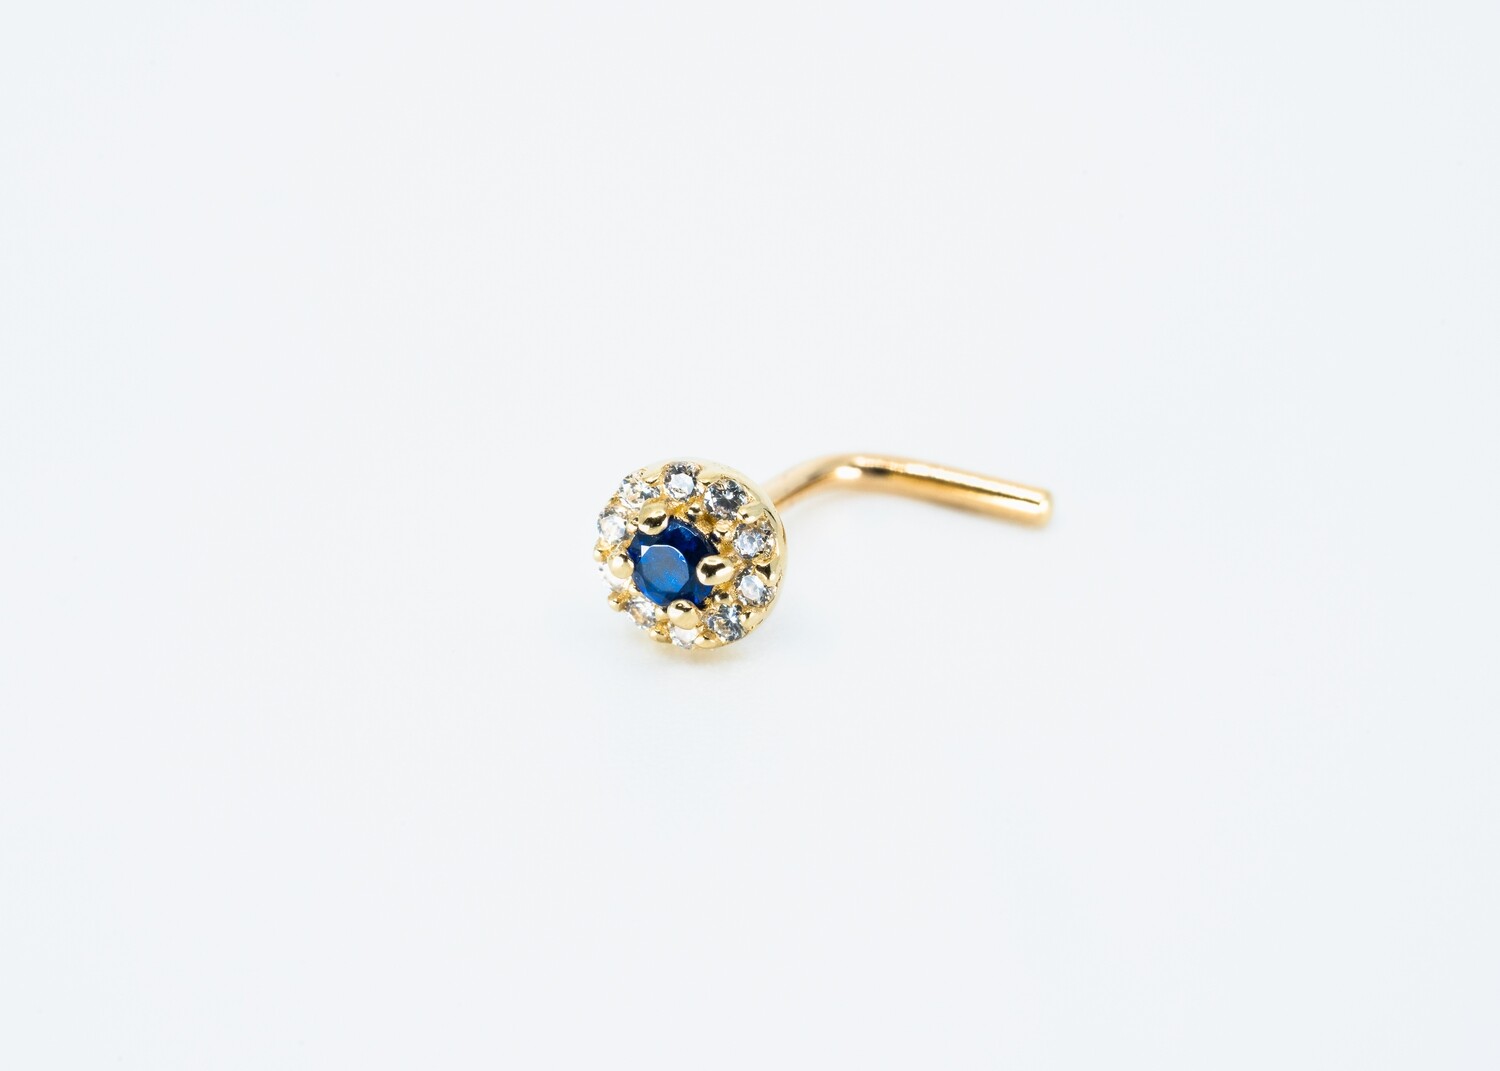 14kt. Gold Nose Piercing with a CZ sapphire and tiny crystals Mark 14k Solid Gold New